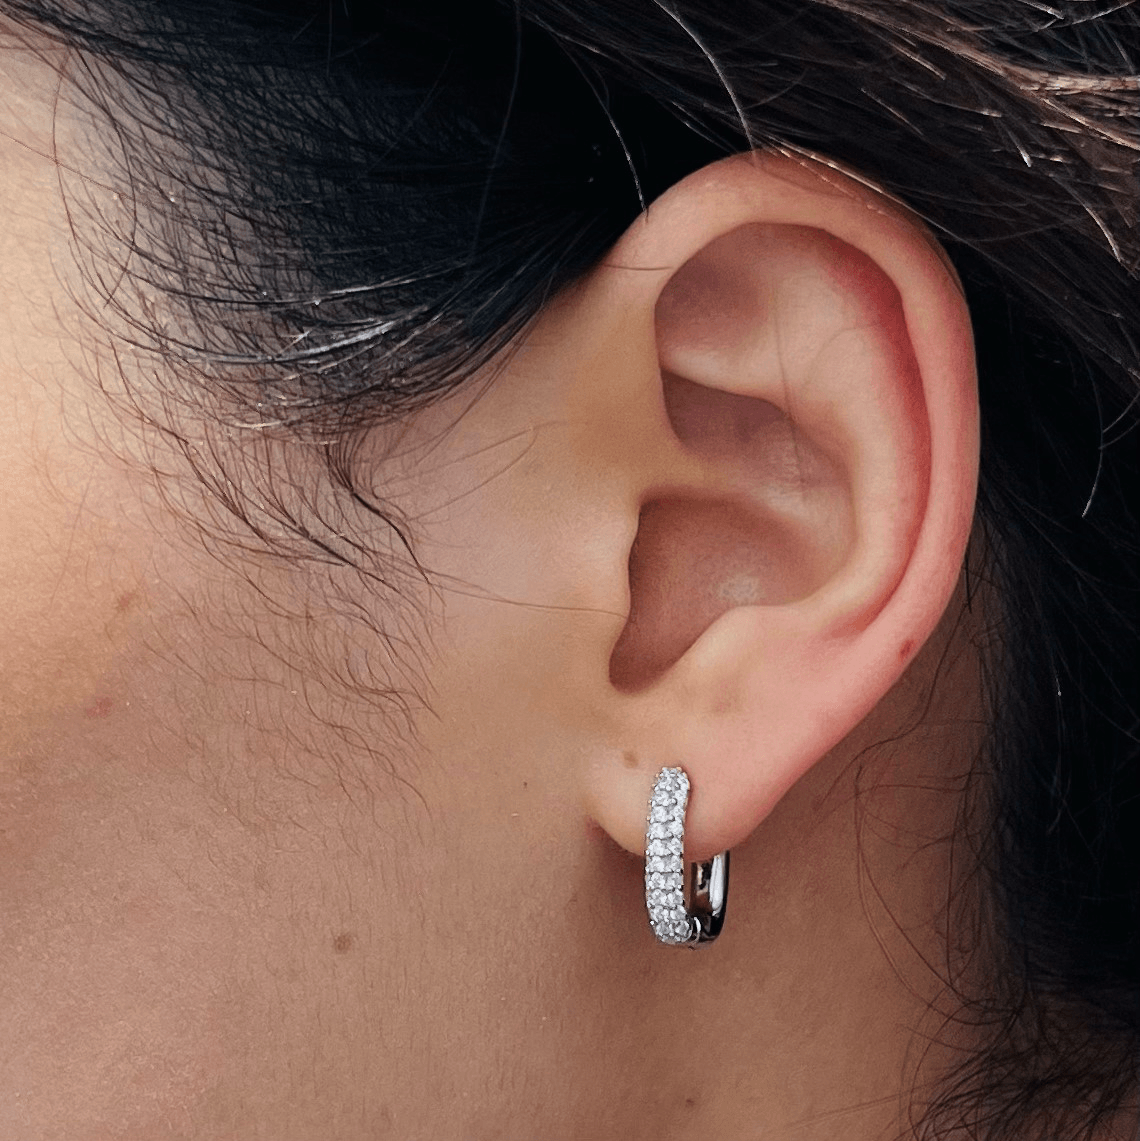 Top-Selling Anti-allergy Sterling Silver Earrings - Uniqvibe